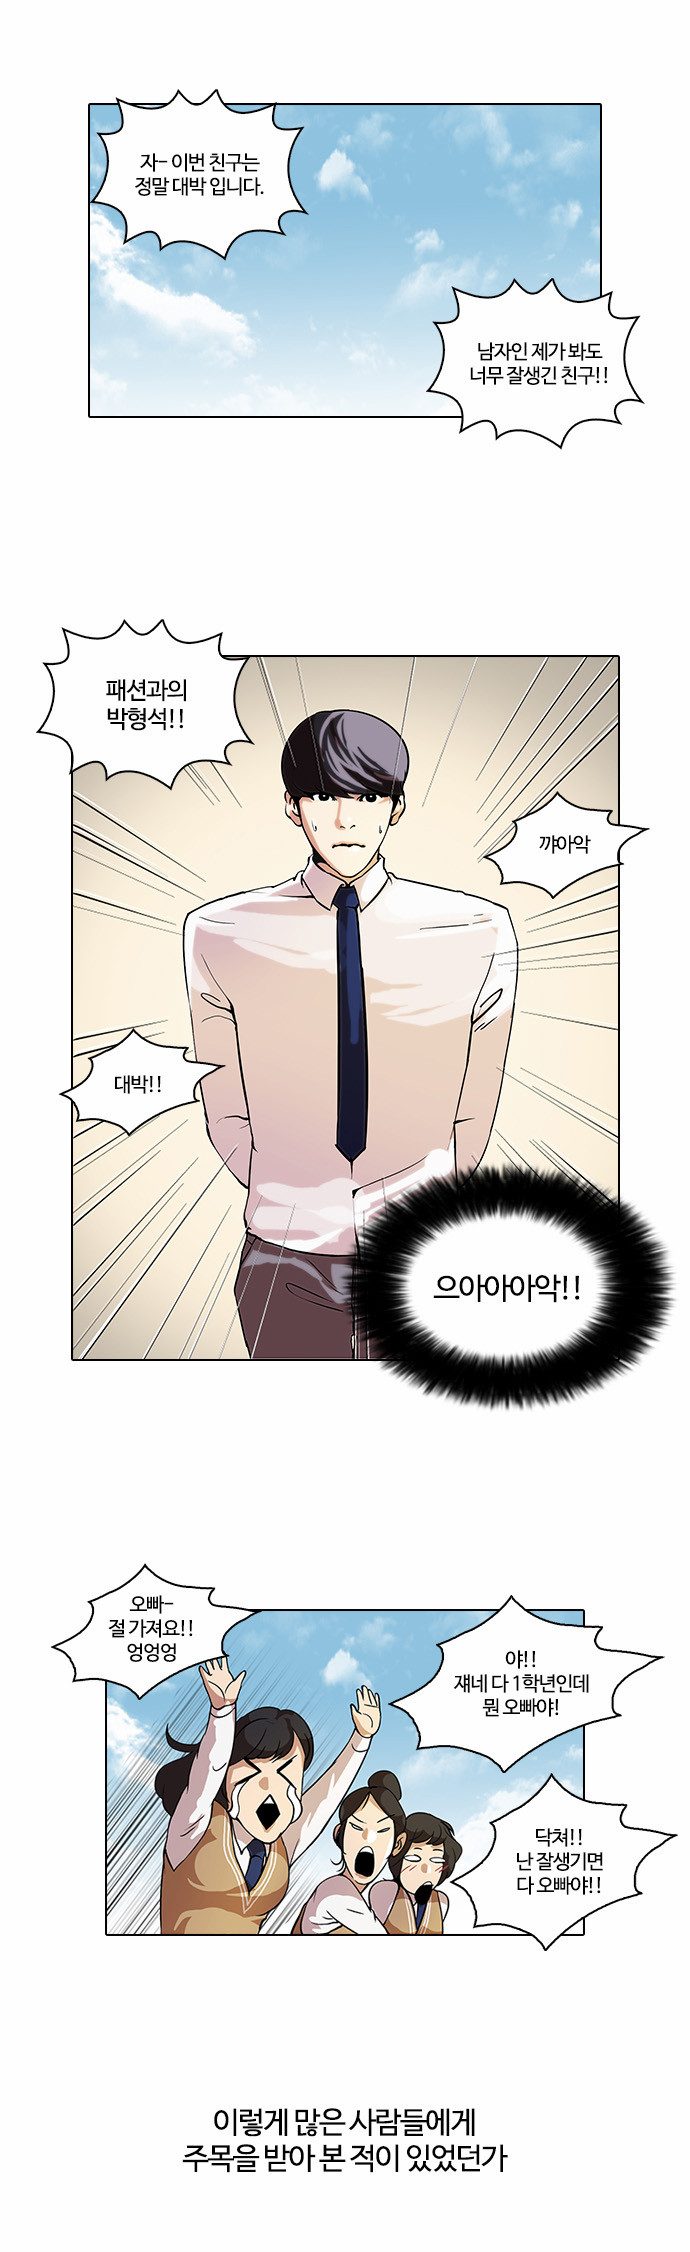 Lookism - Chapter 25 - Page 1